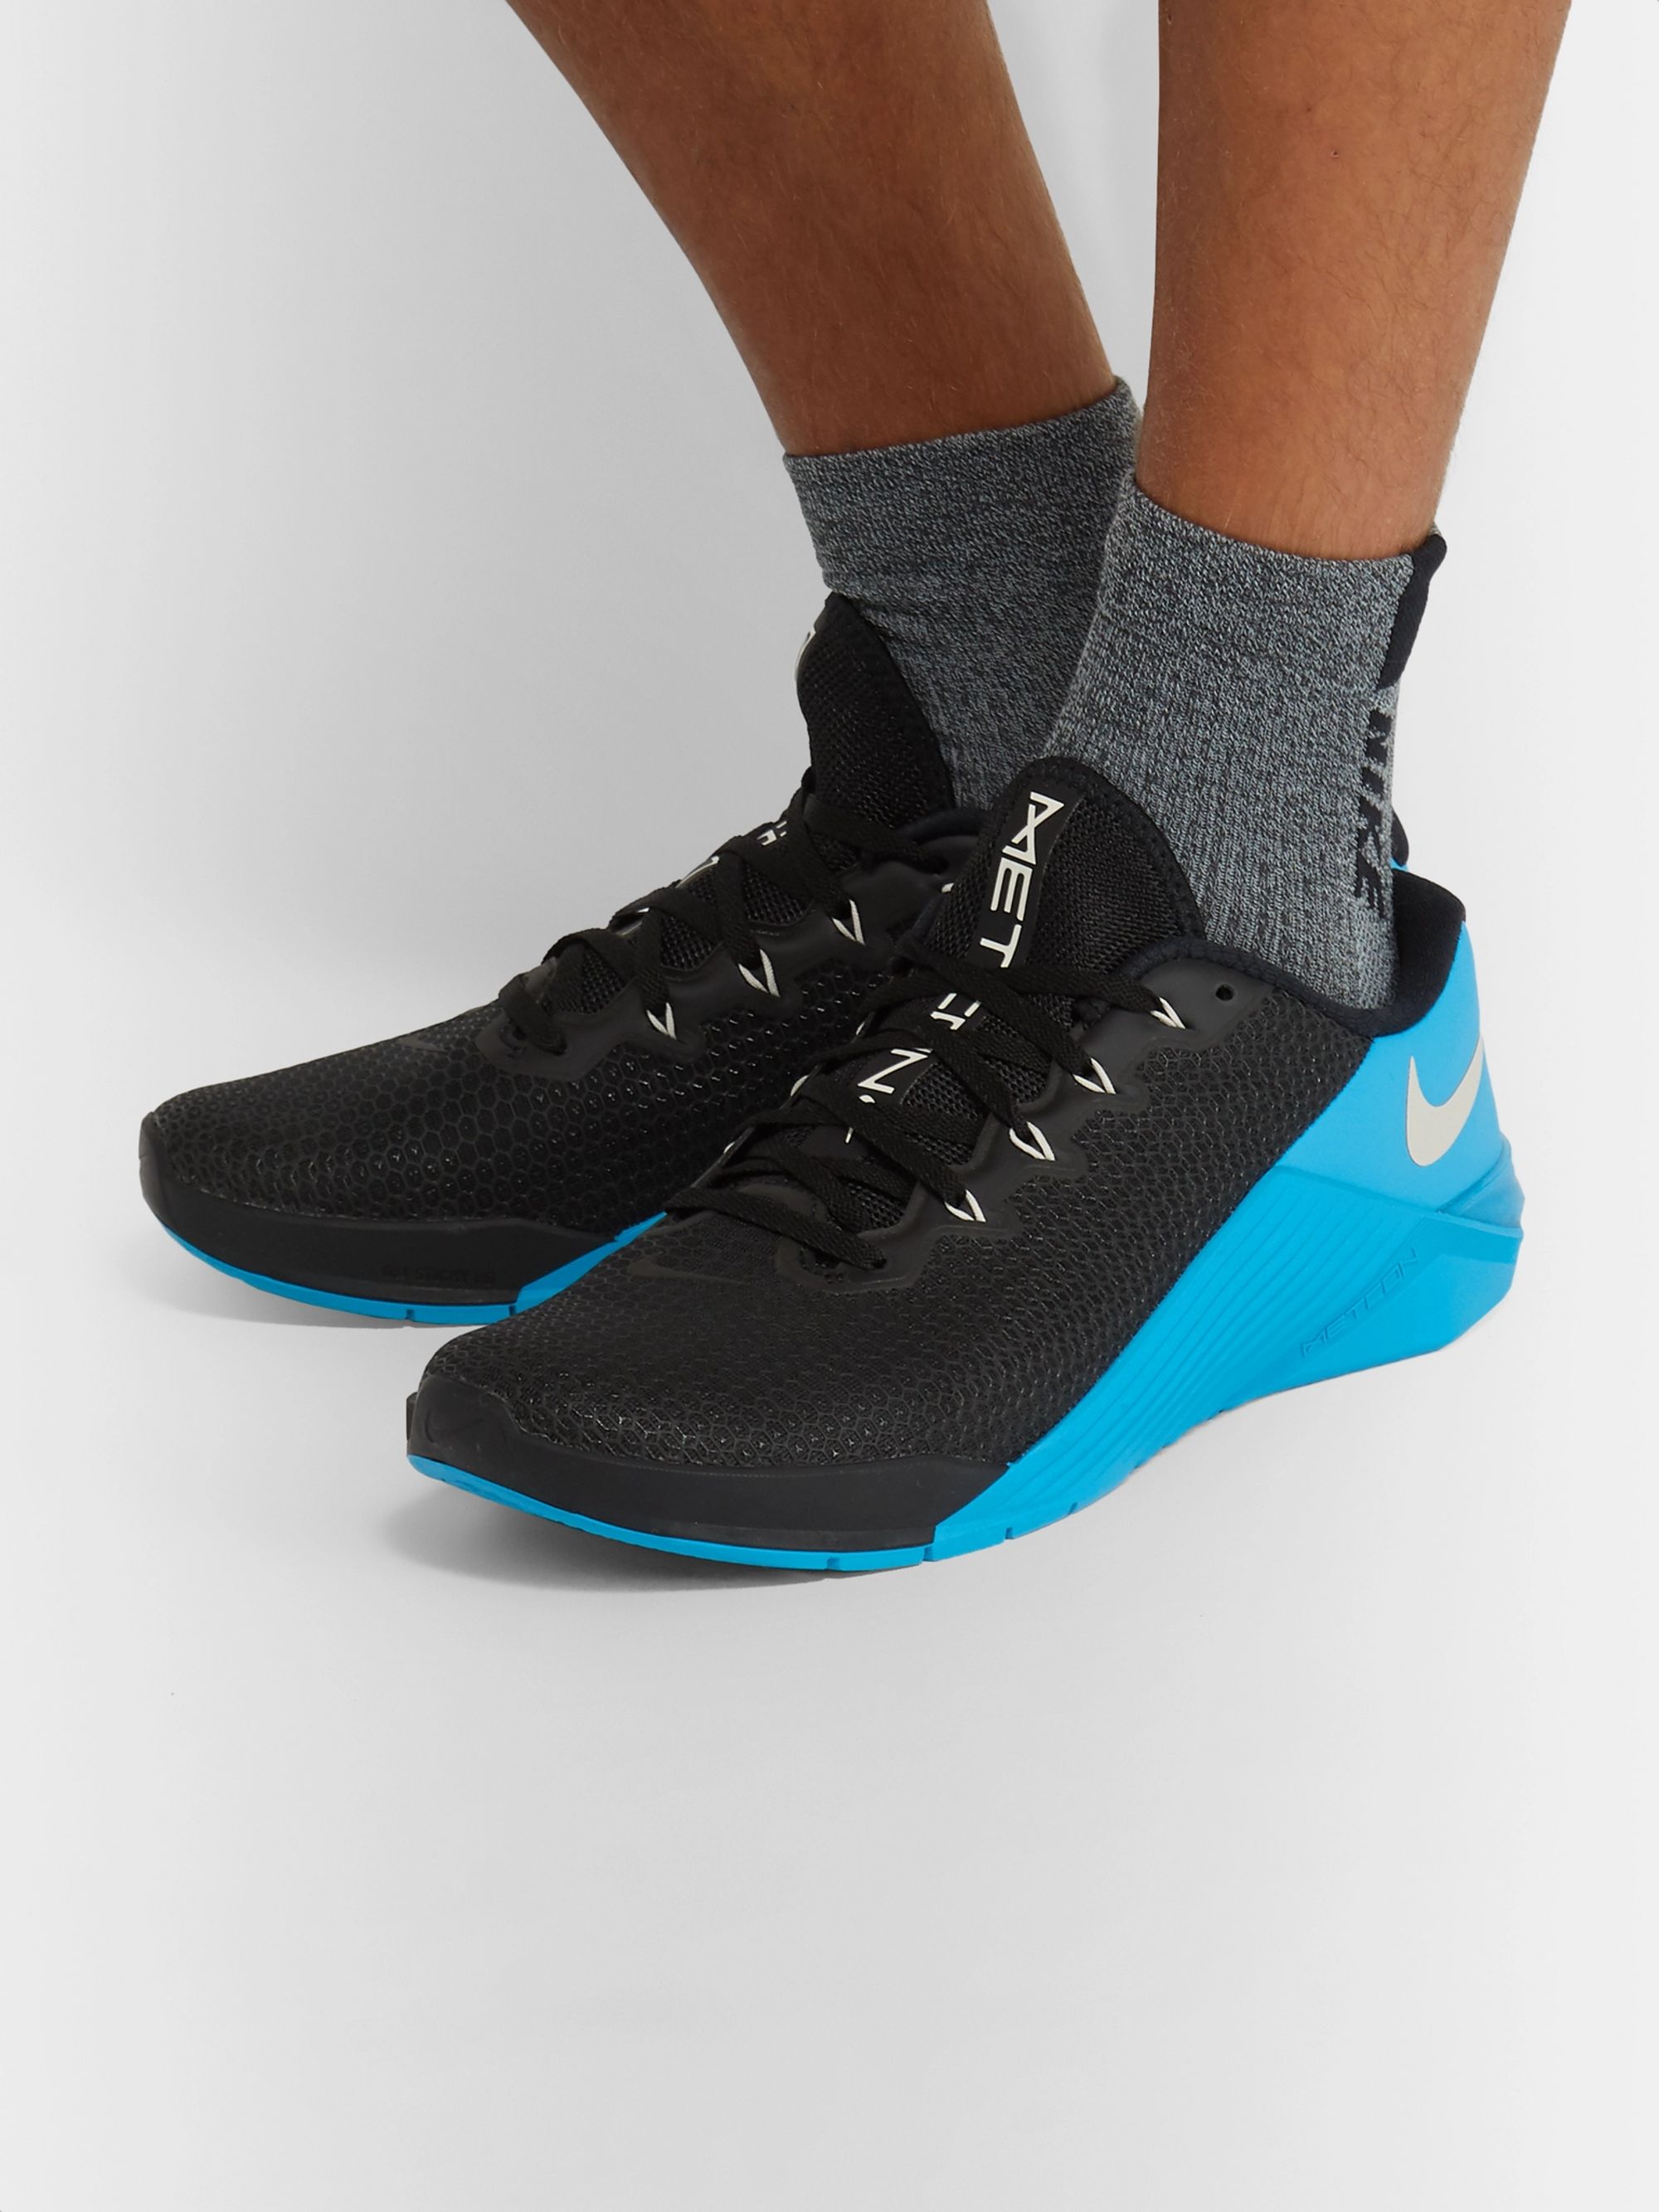 DAANIS: Cool Black And Blue Nike Shoes